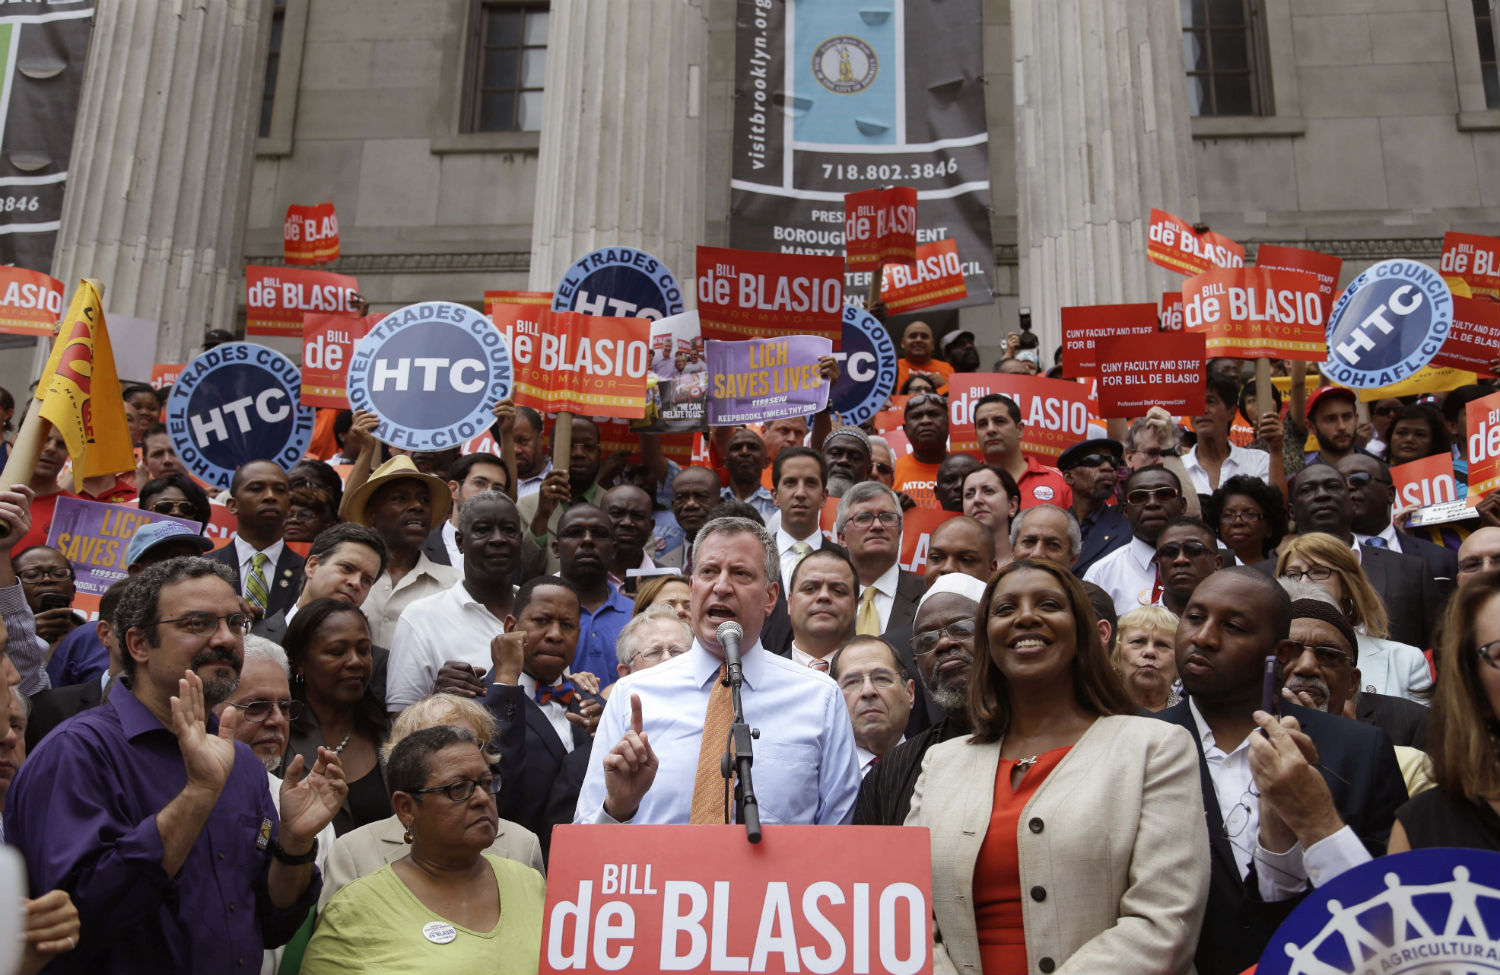 De Blasio Promised to Fight NYC’s Inequality. Here’s How You Can Tell If He’s Winning.